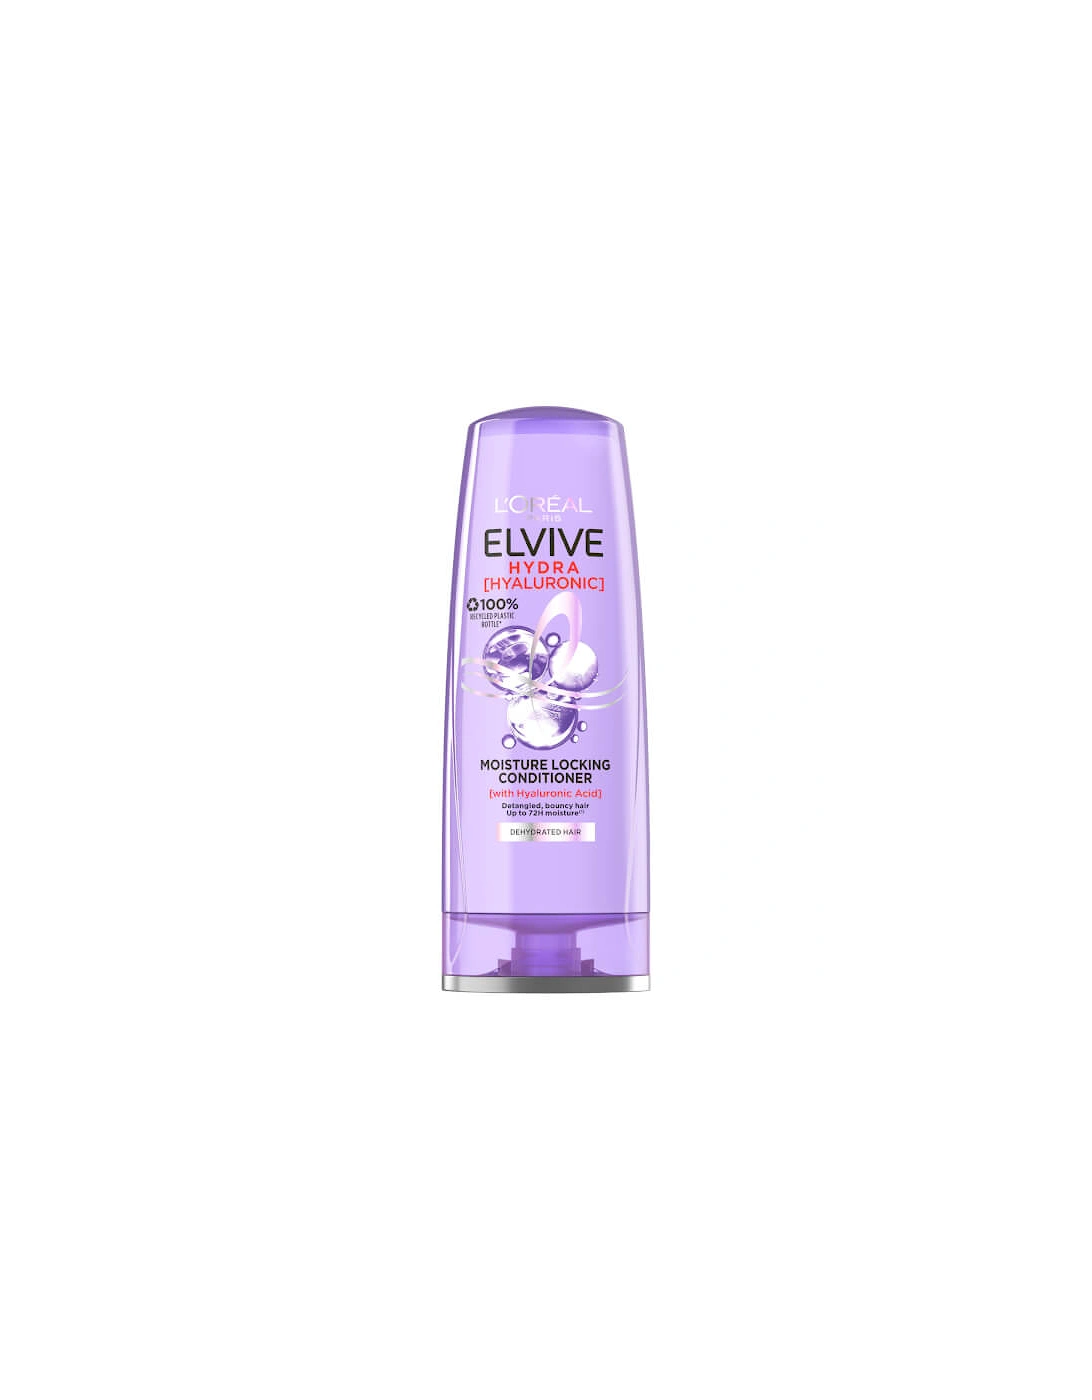 L'Oreal Elvive Hydra Hyaluronic Acid Conditioner - 250ml, 2 of 1